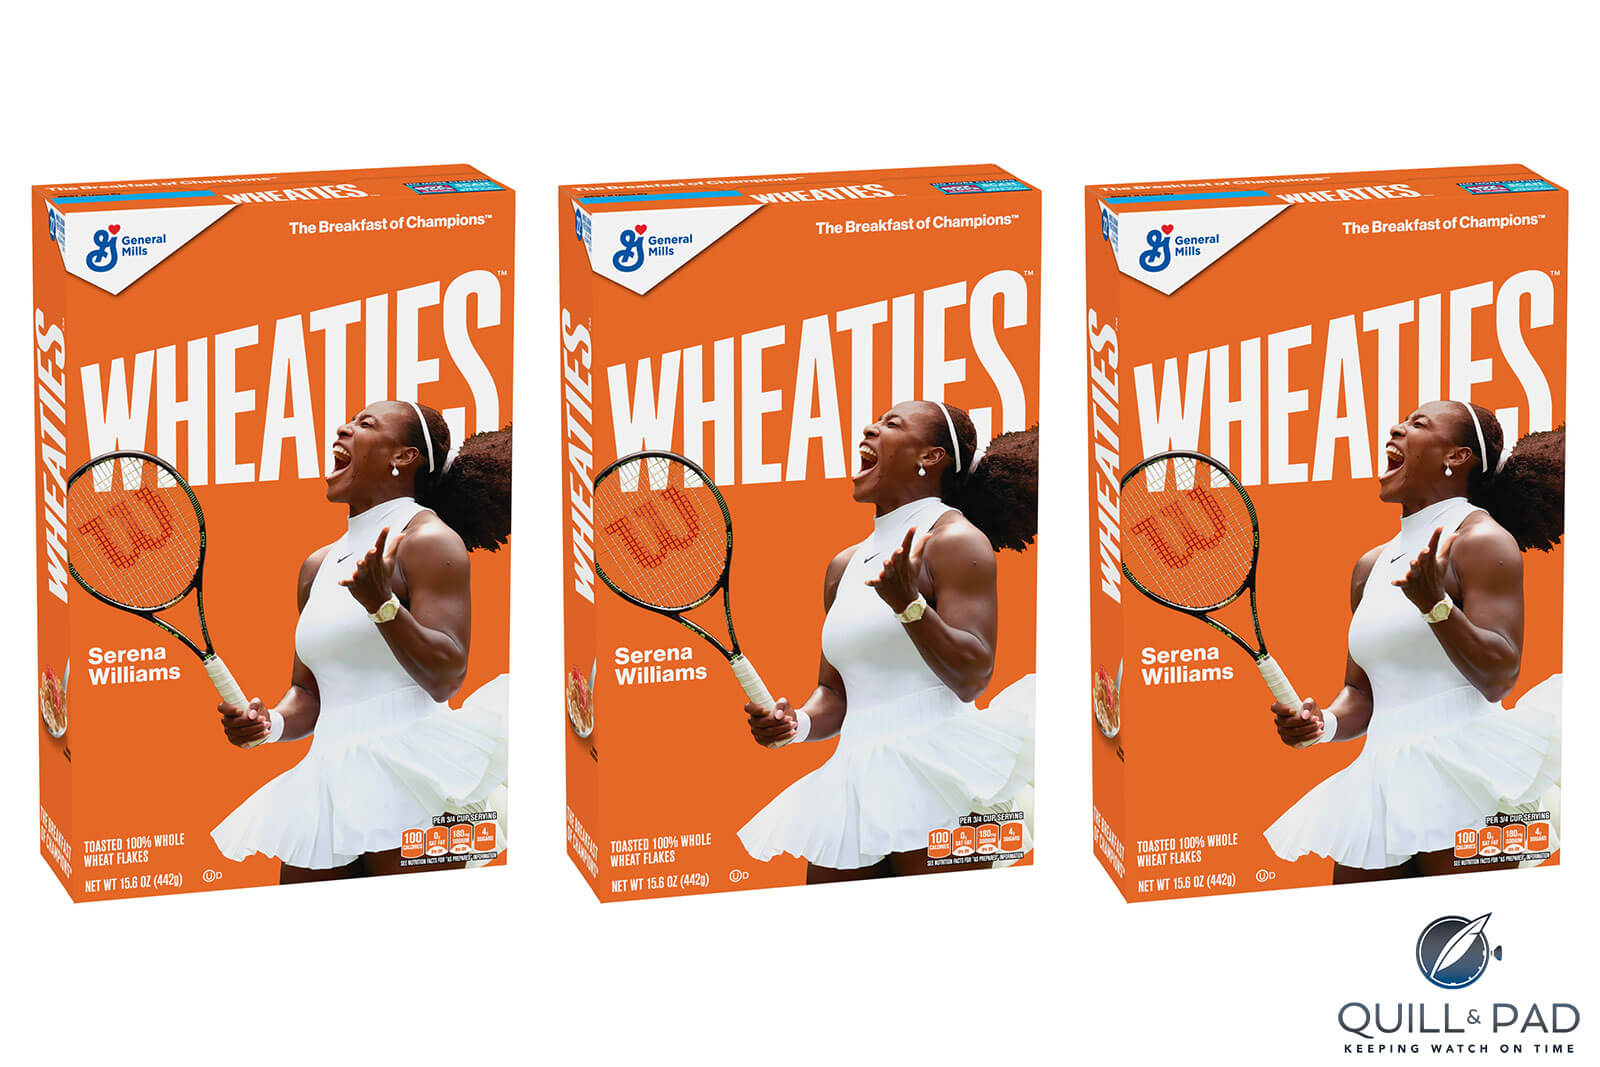 Serena Williams wearing her Audemars Piguet Royal Oak Offshore Chronograph 37 mm upside-down on the cover of Wheaties cereal boxes